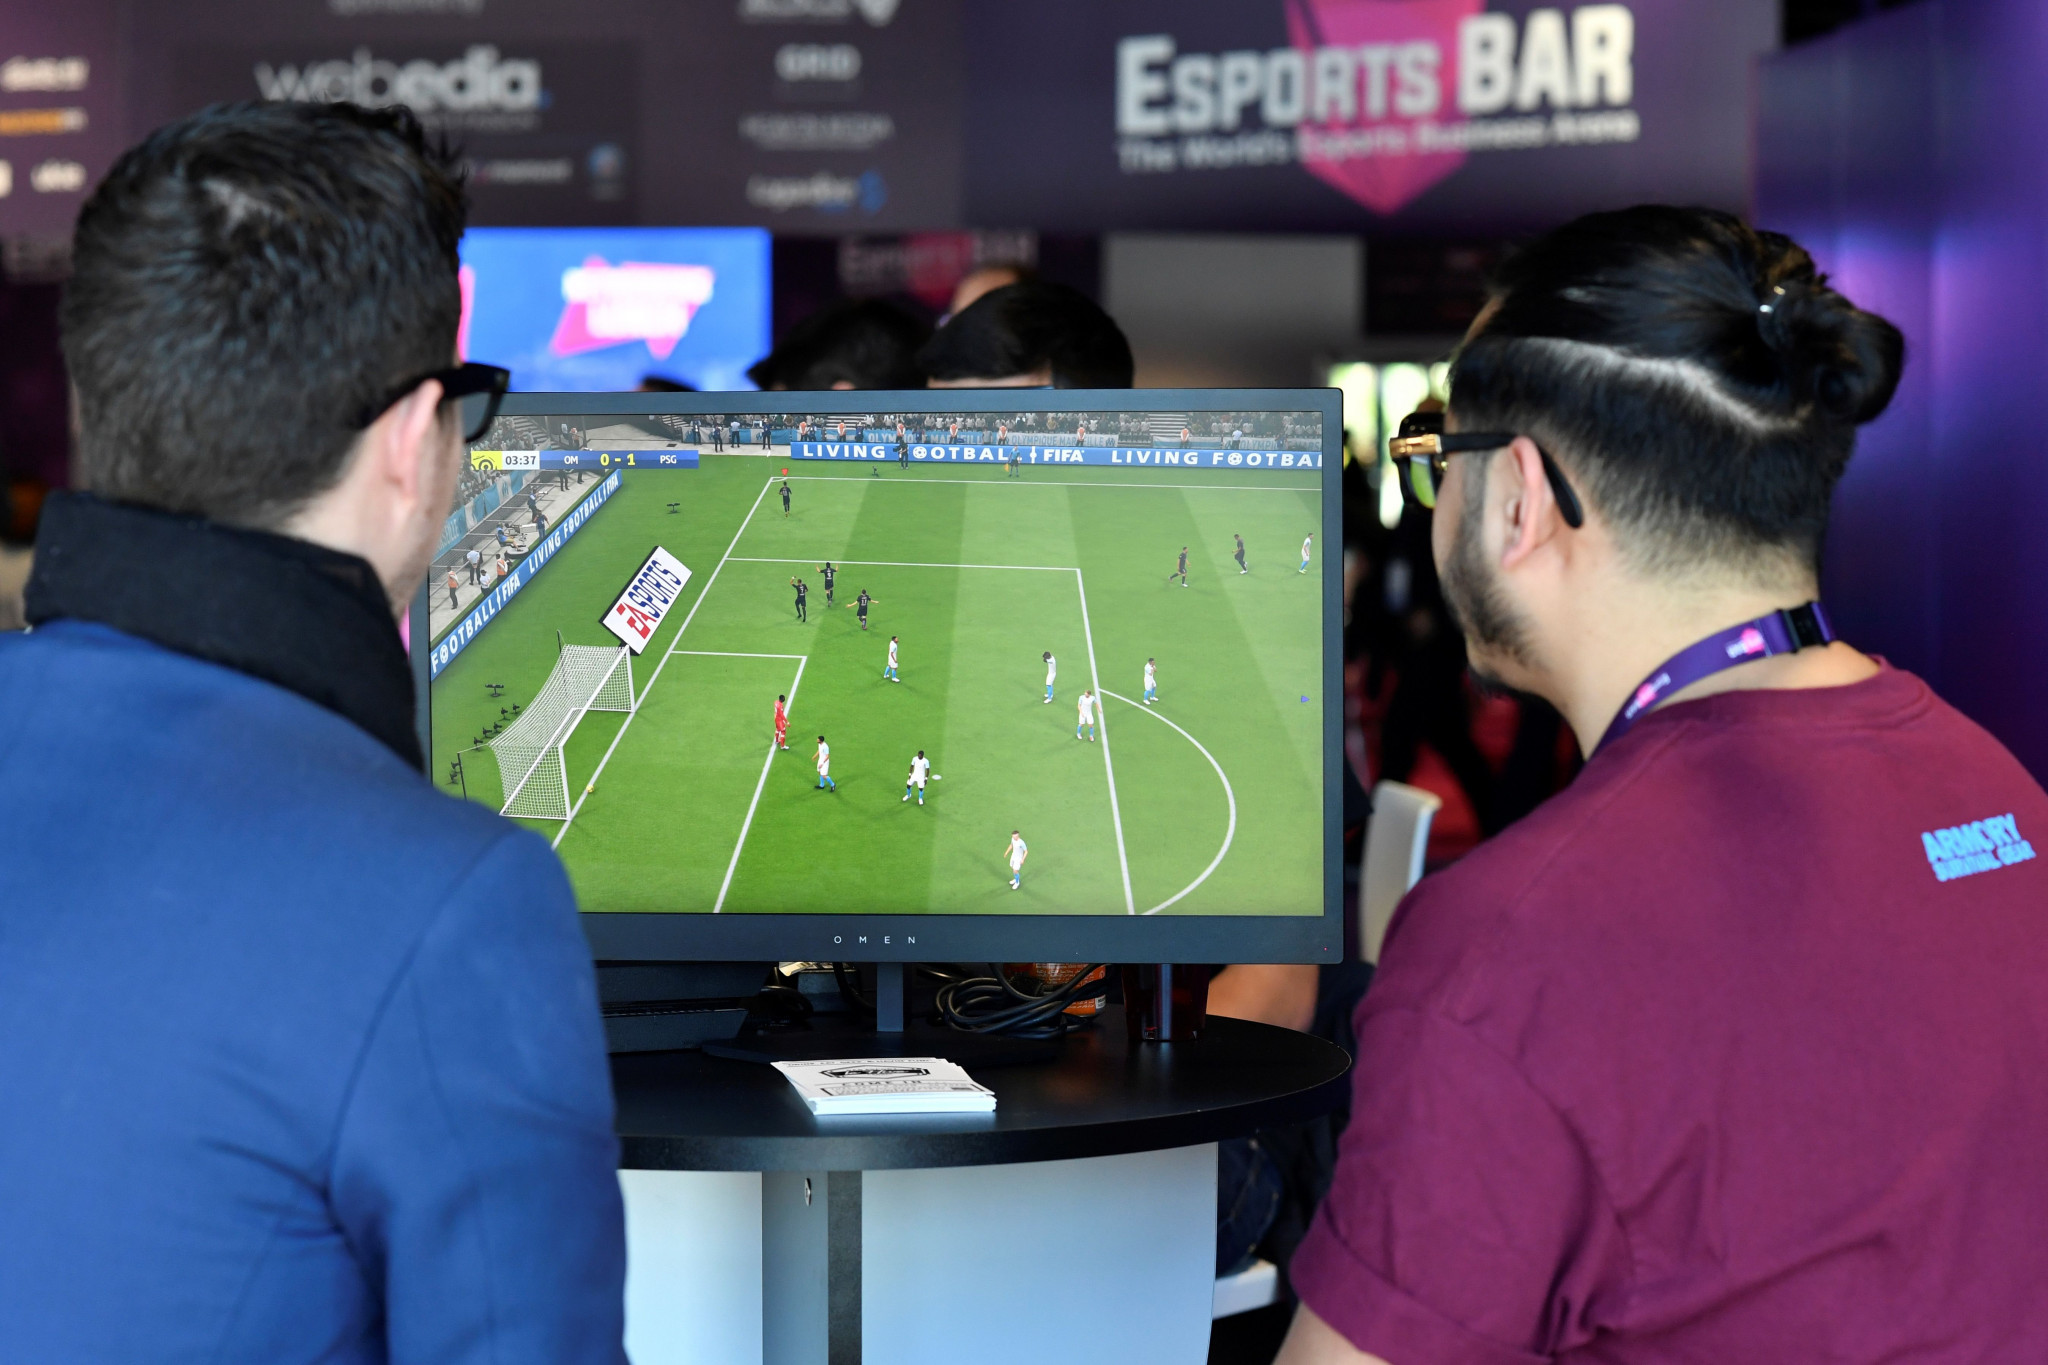 Esports tournament at Minsk 2019 to feature $2,000 prize pool